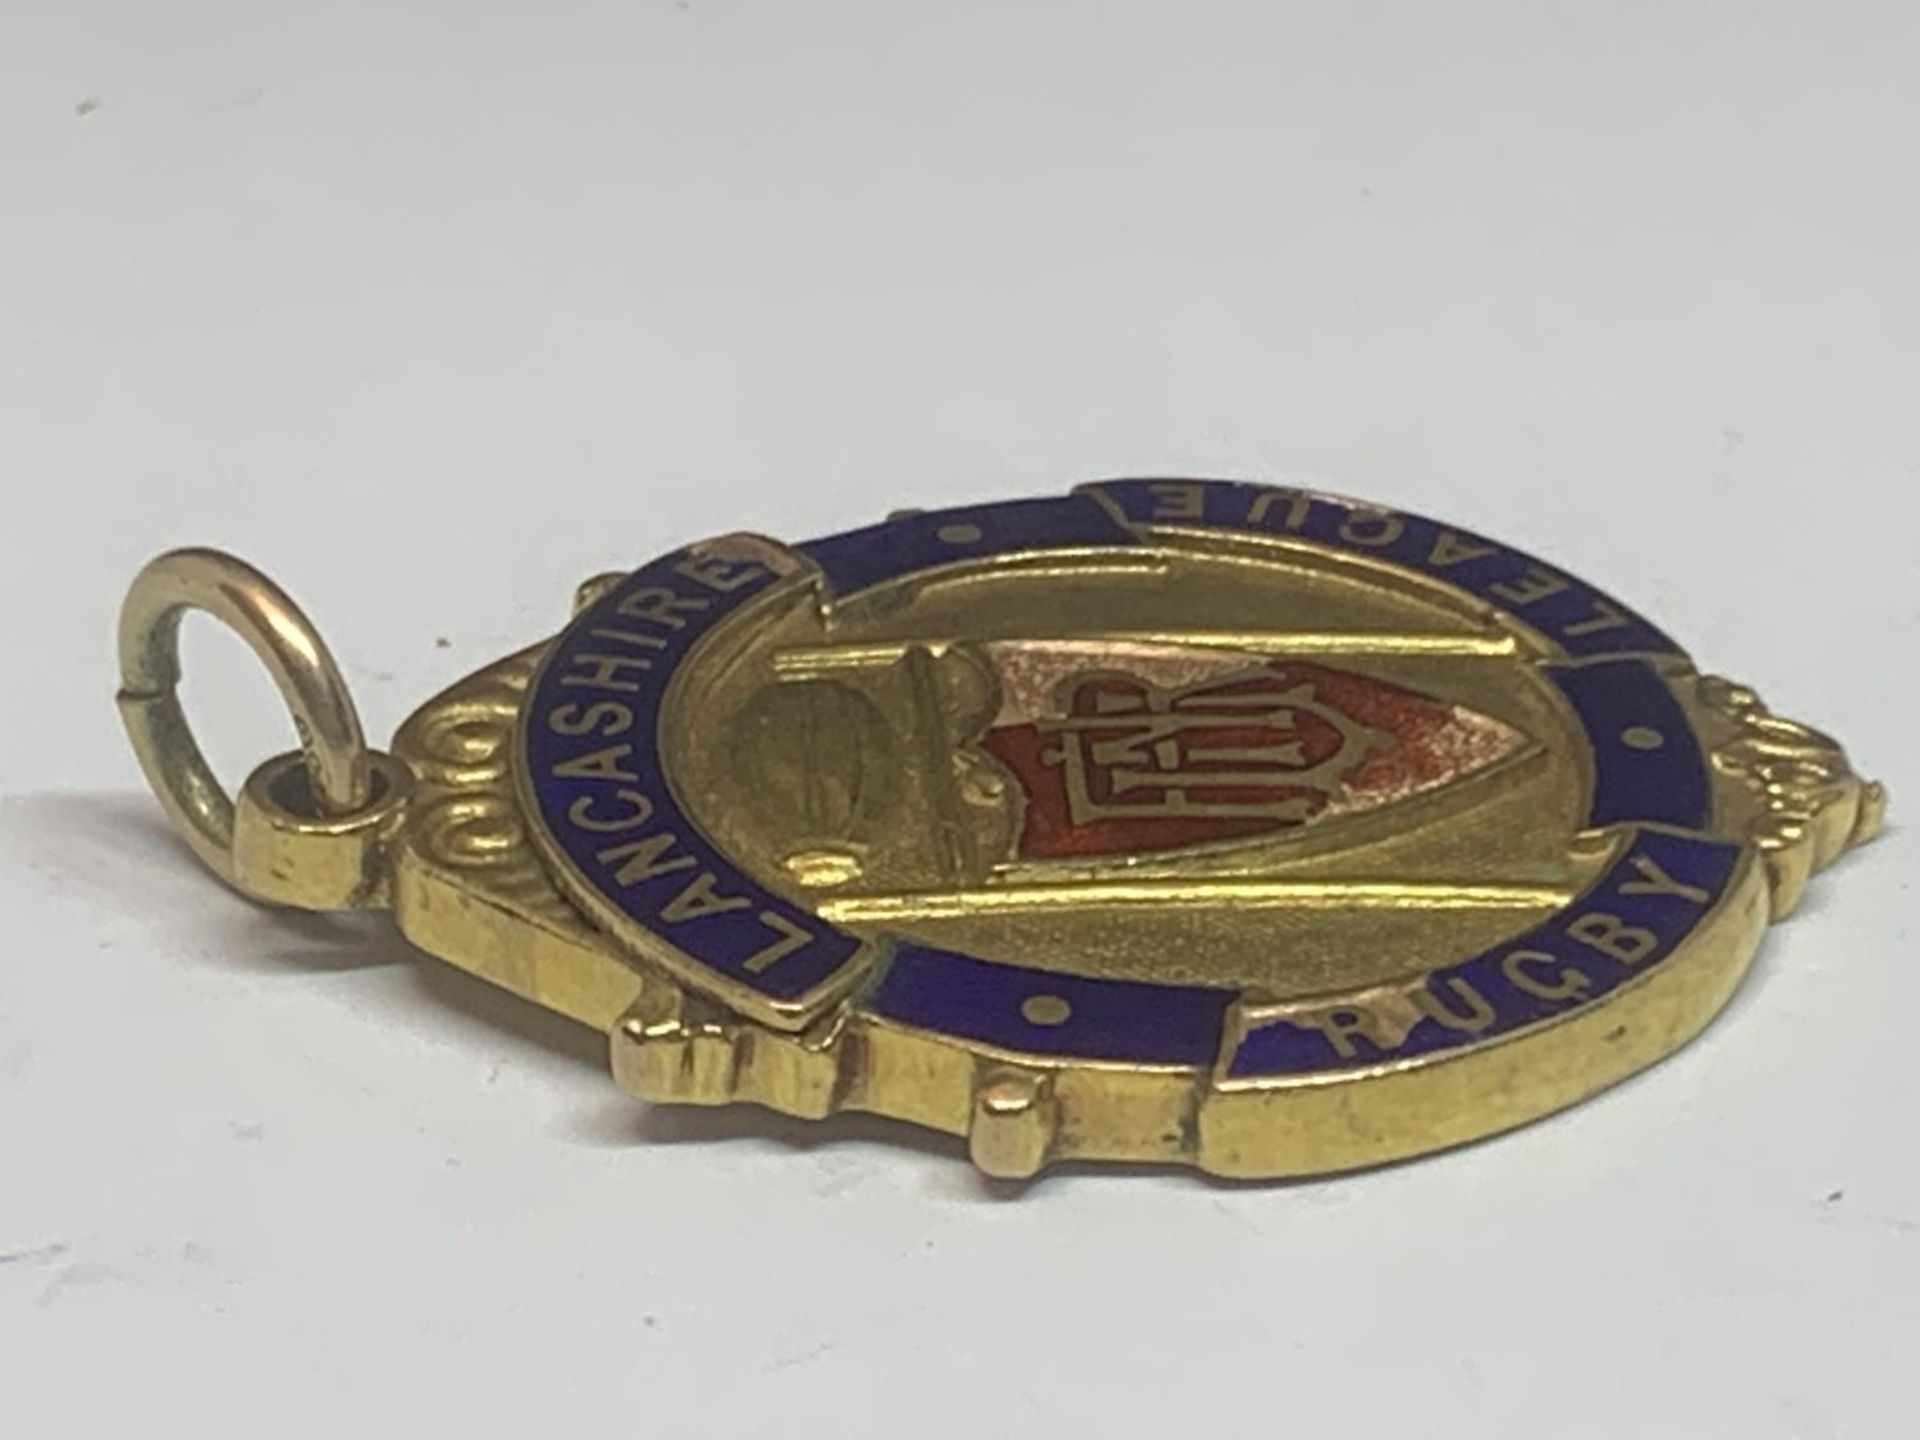 A HALLMARKED 9 CARAT GOLD LANCASHIRE RUGBY LEAGUE MEDAL ENGRAVED WINNERS 1932-33 SALFORD F.C., S.E. - Image 5 of 5